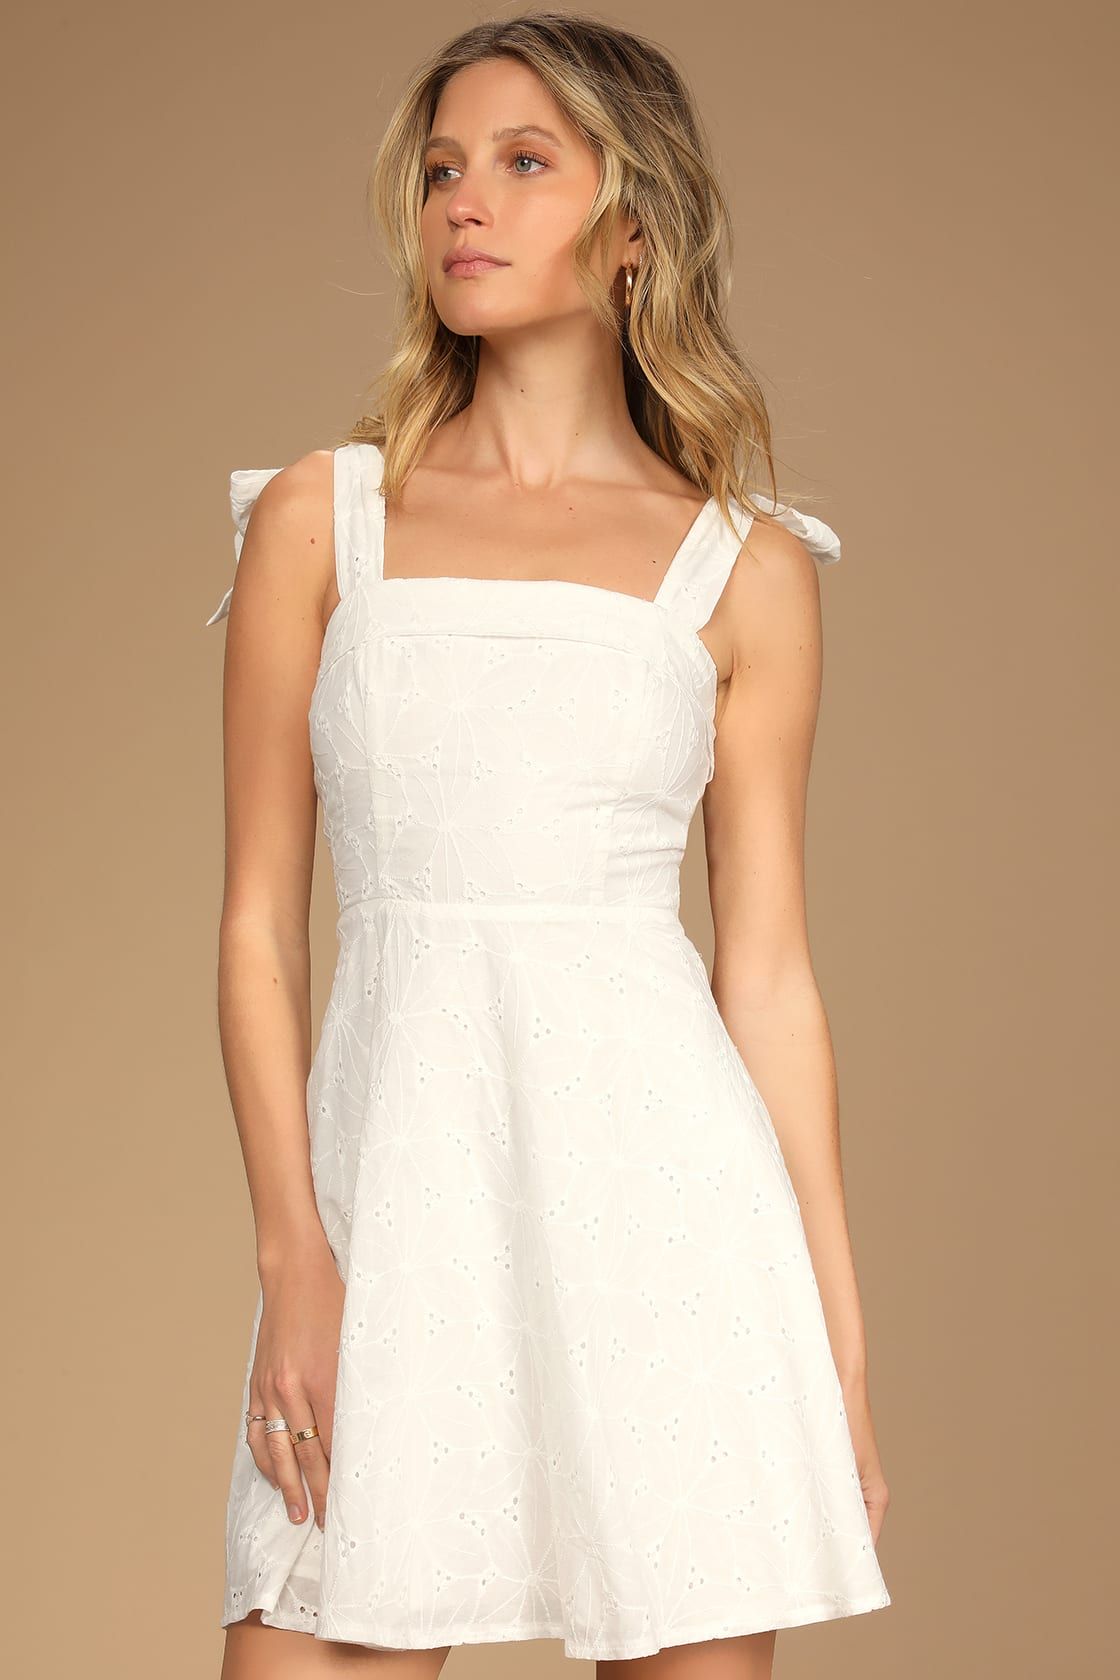 Sneak a Kiss White Floral Embroidered Tie-Strap Mini Dress | Lulus (US)